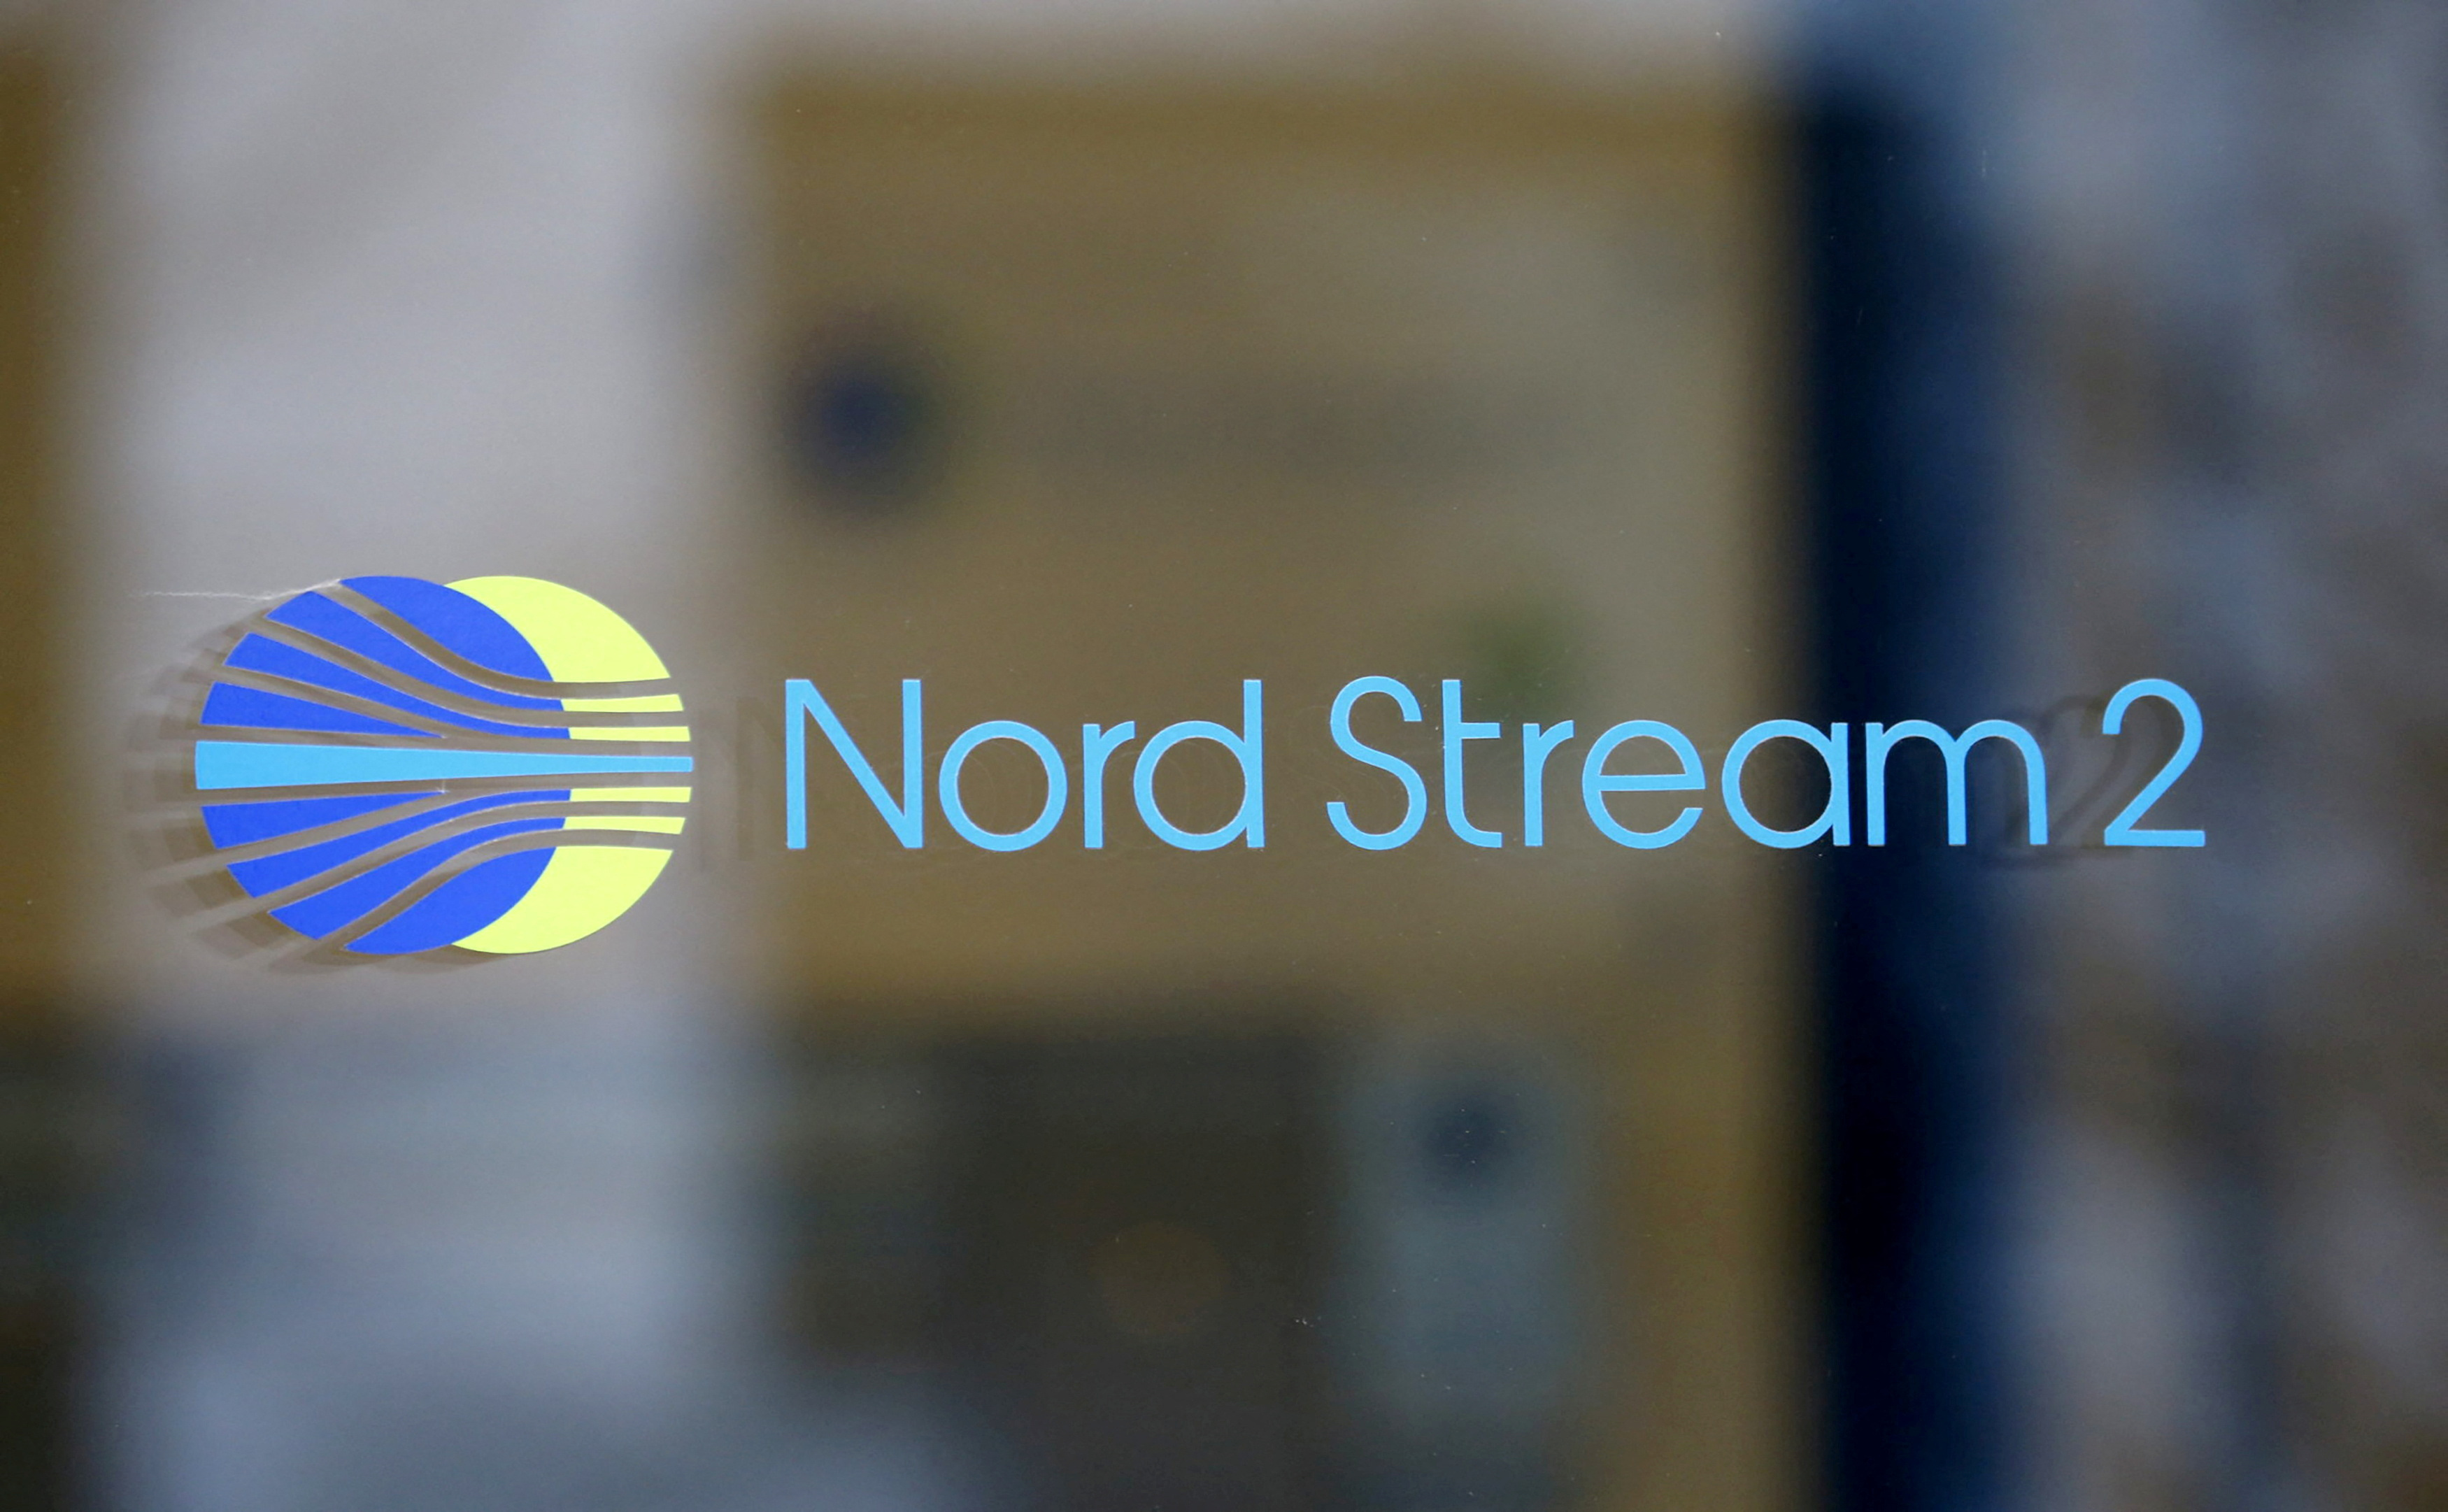 The logo of Nord Stream 2 AG is seen at an office building in Zug